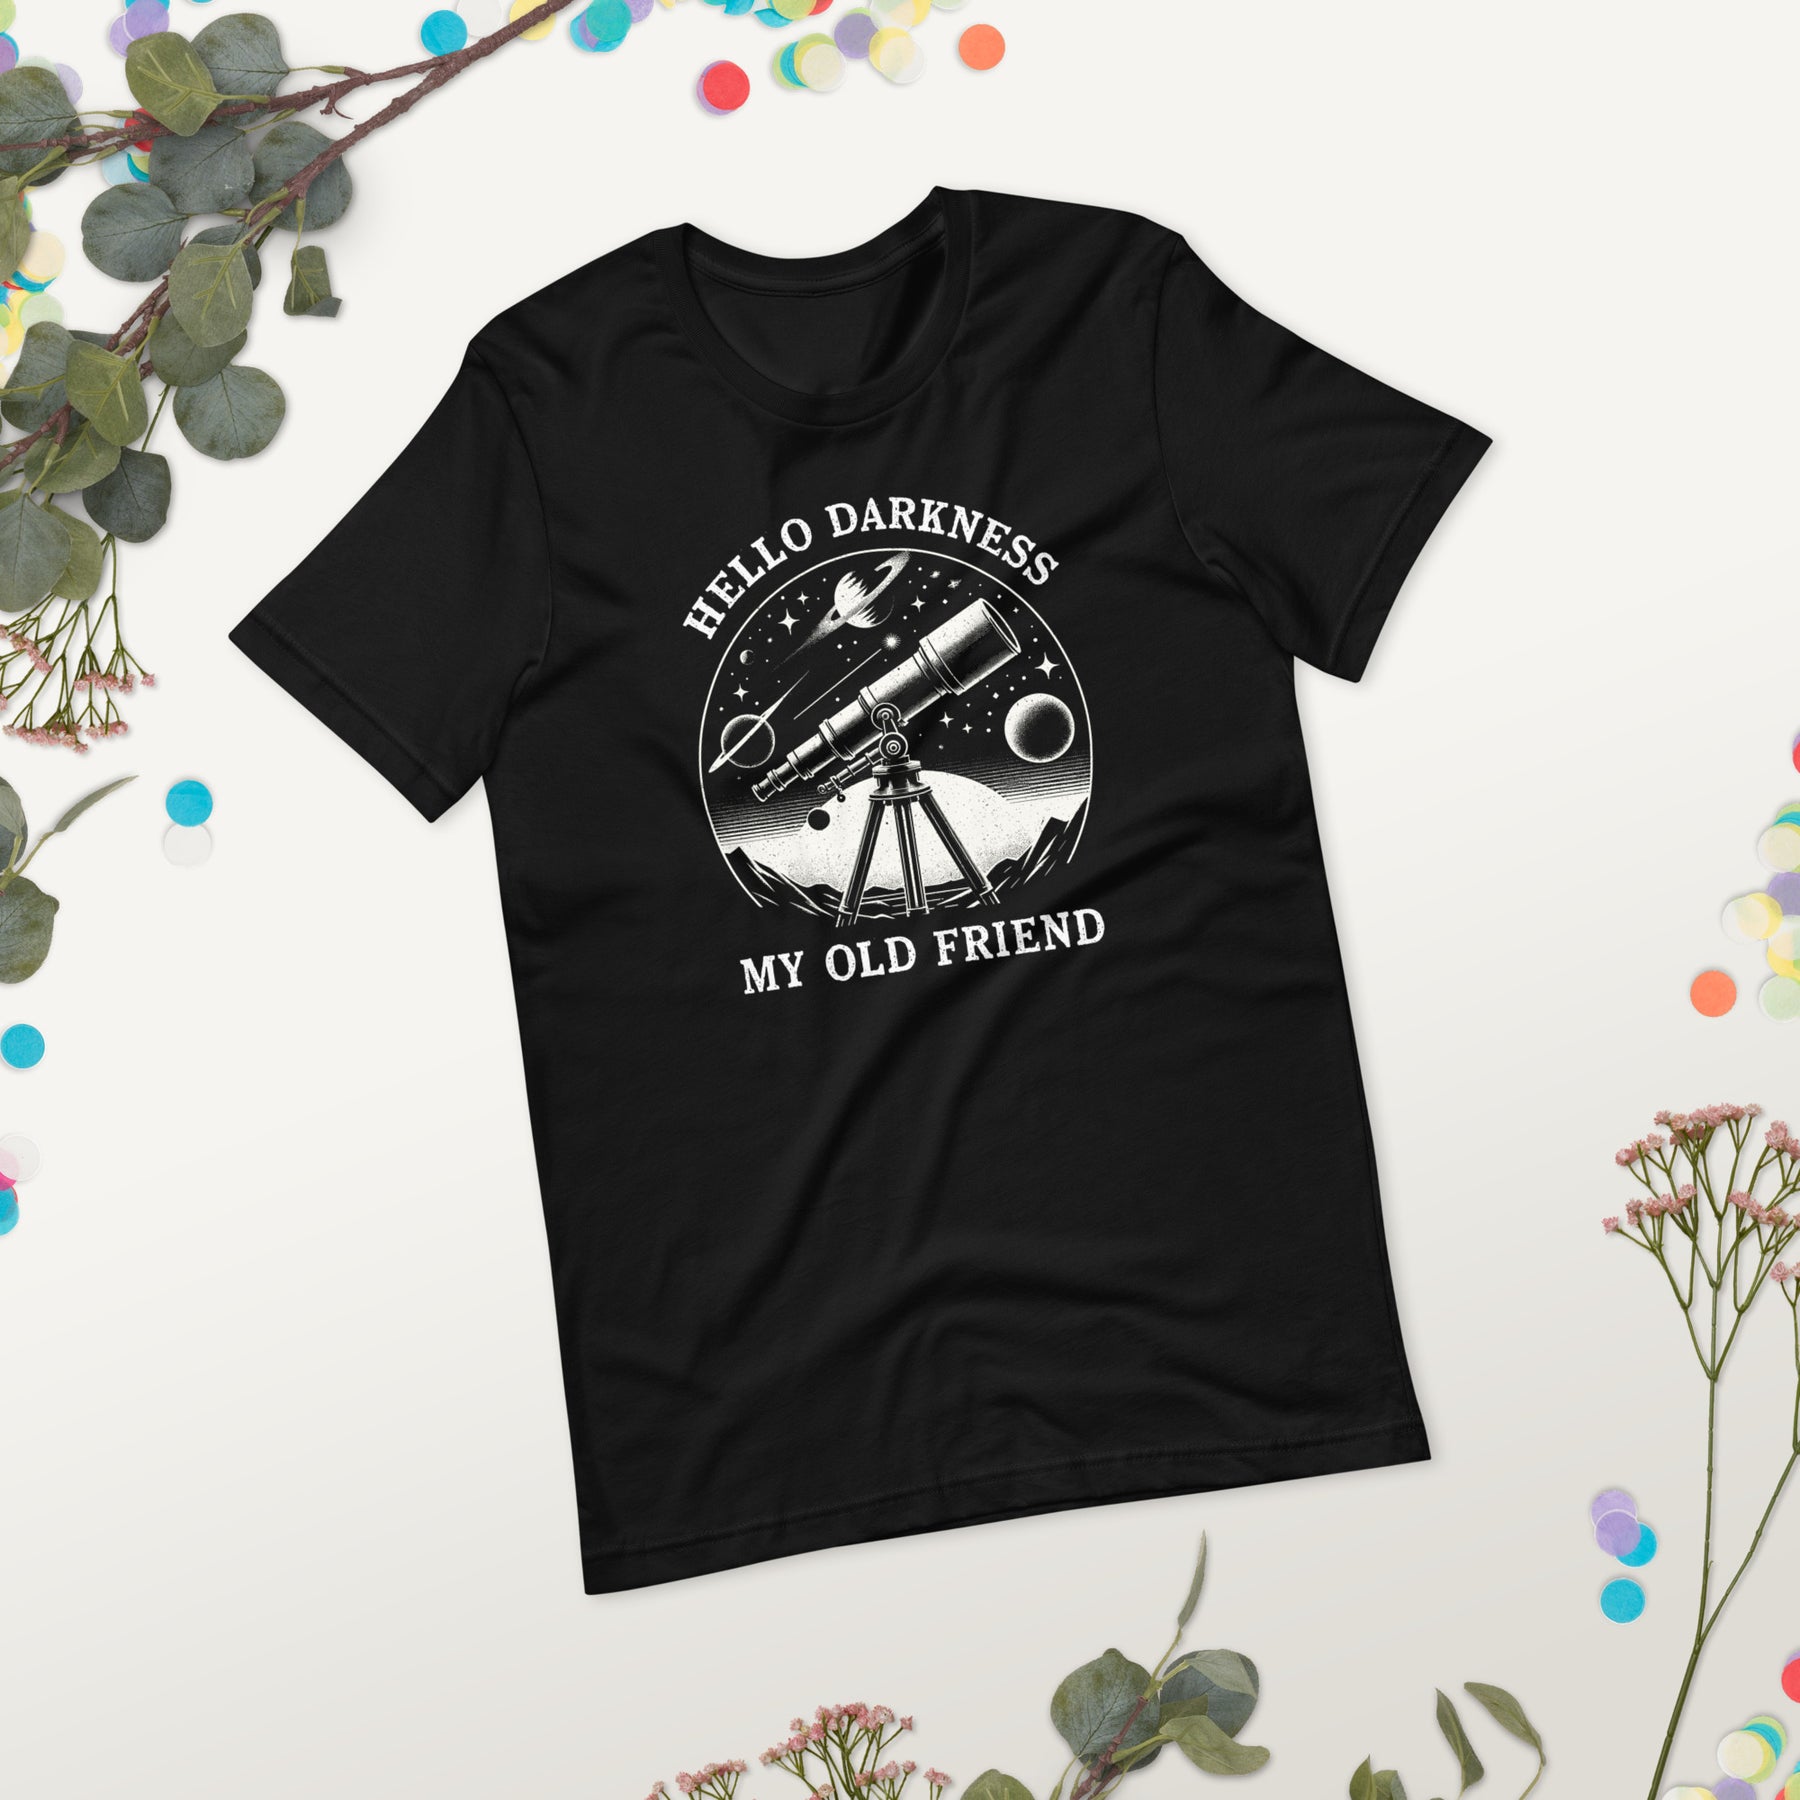 Hello Darkness My Old Friend Shirt, Funny Astronomer Tee, Space Exploration, Future Astronaut Gift, Science Humor T-Shirt